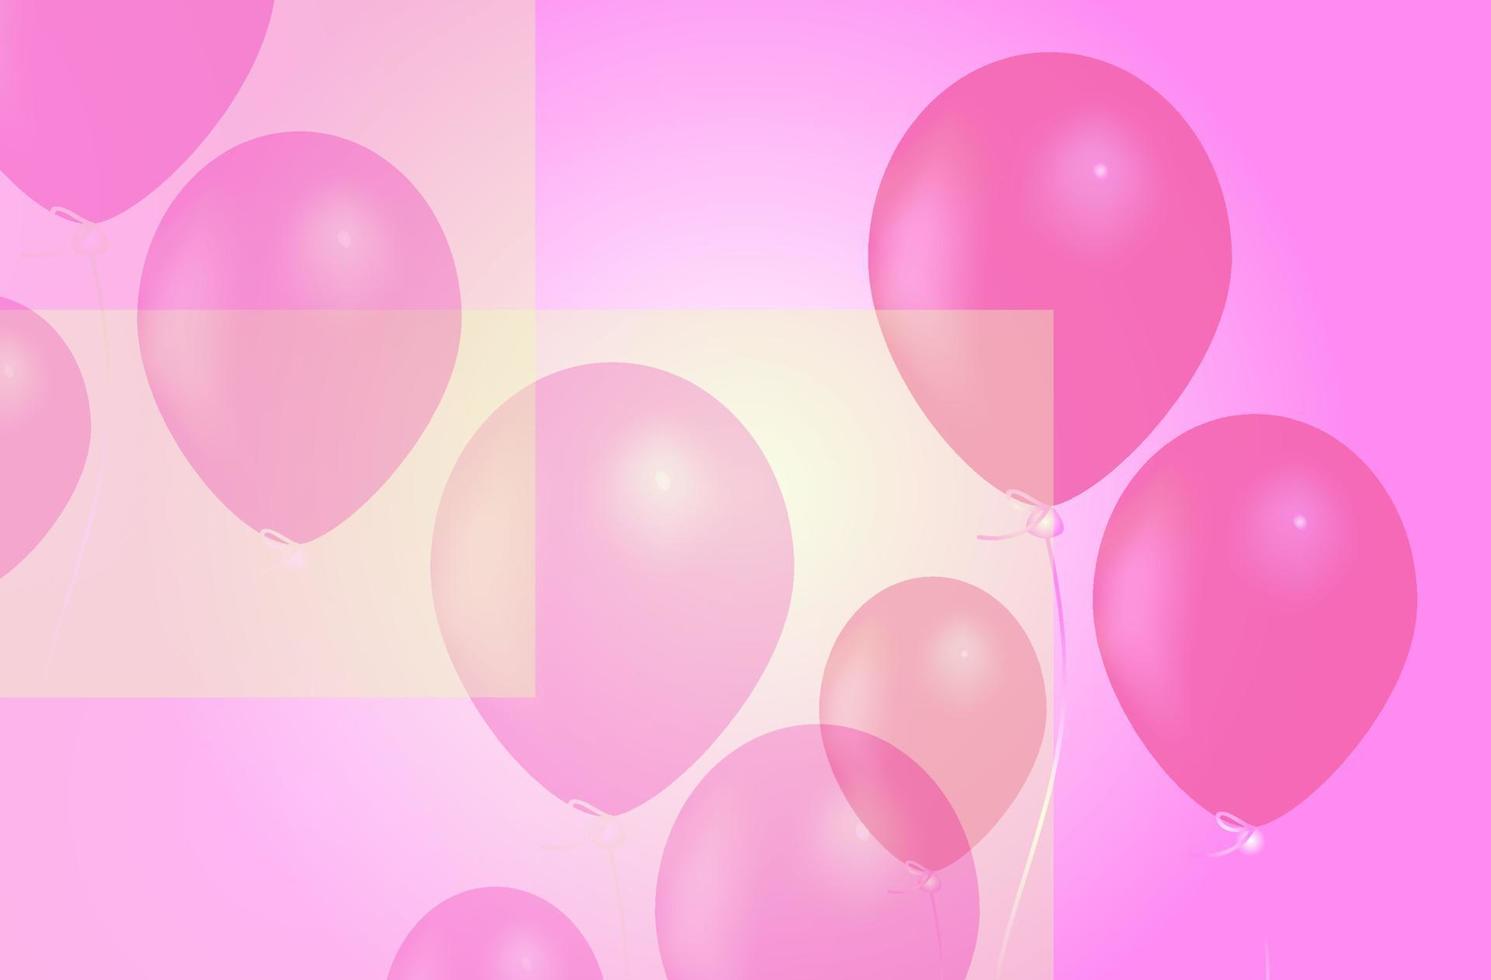 abstract pink background with balloons vector